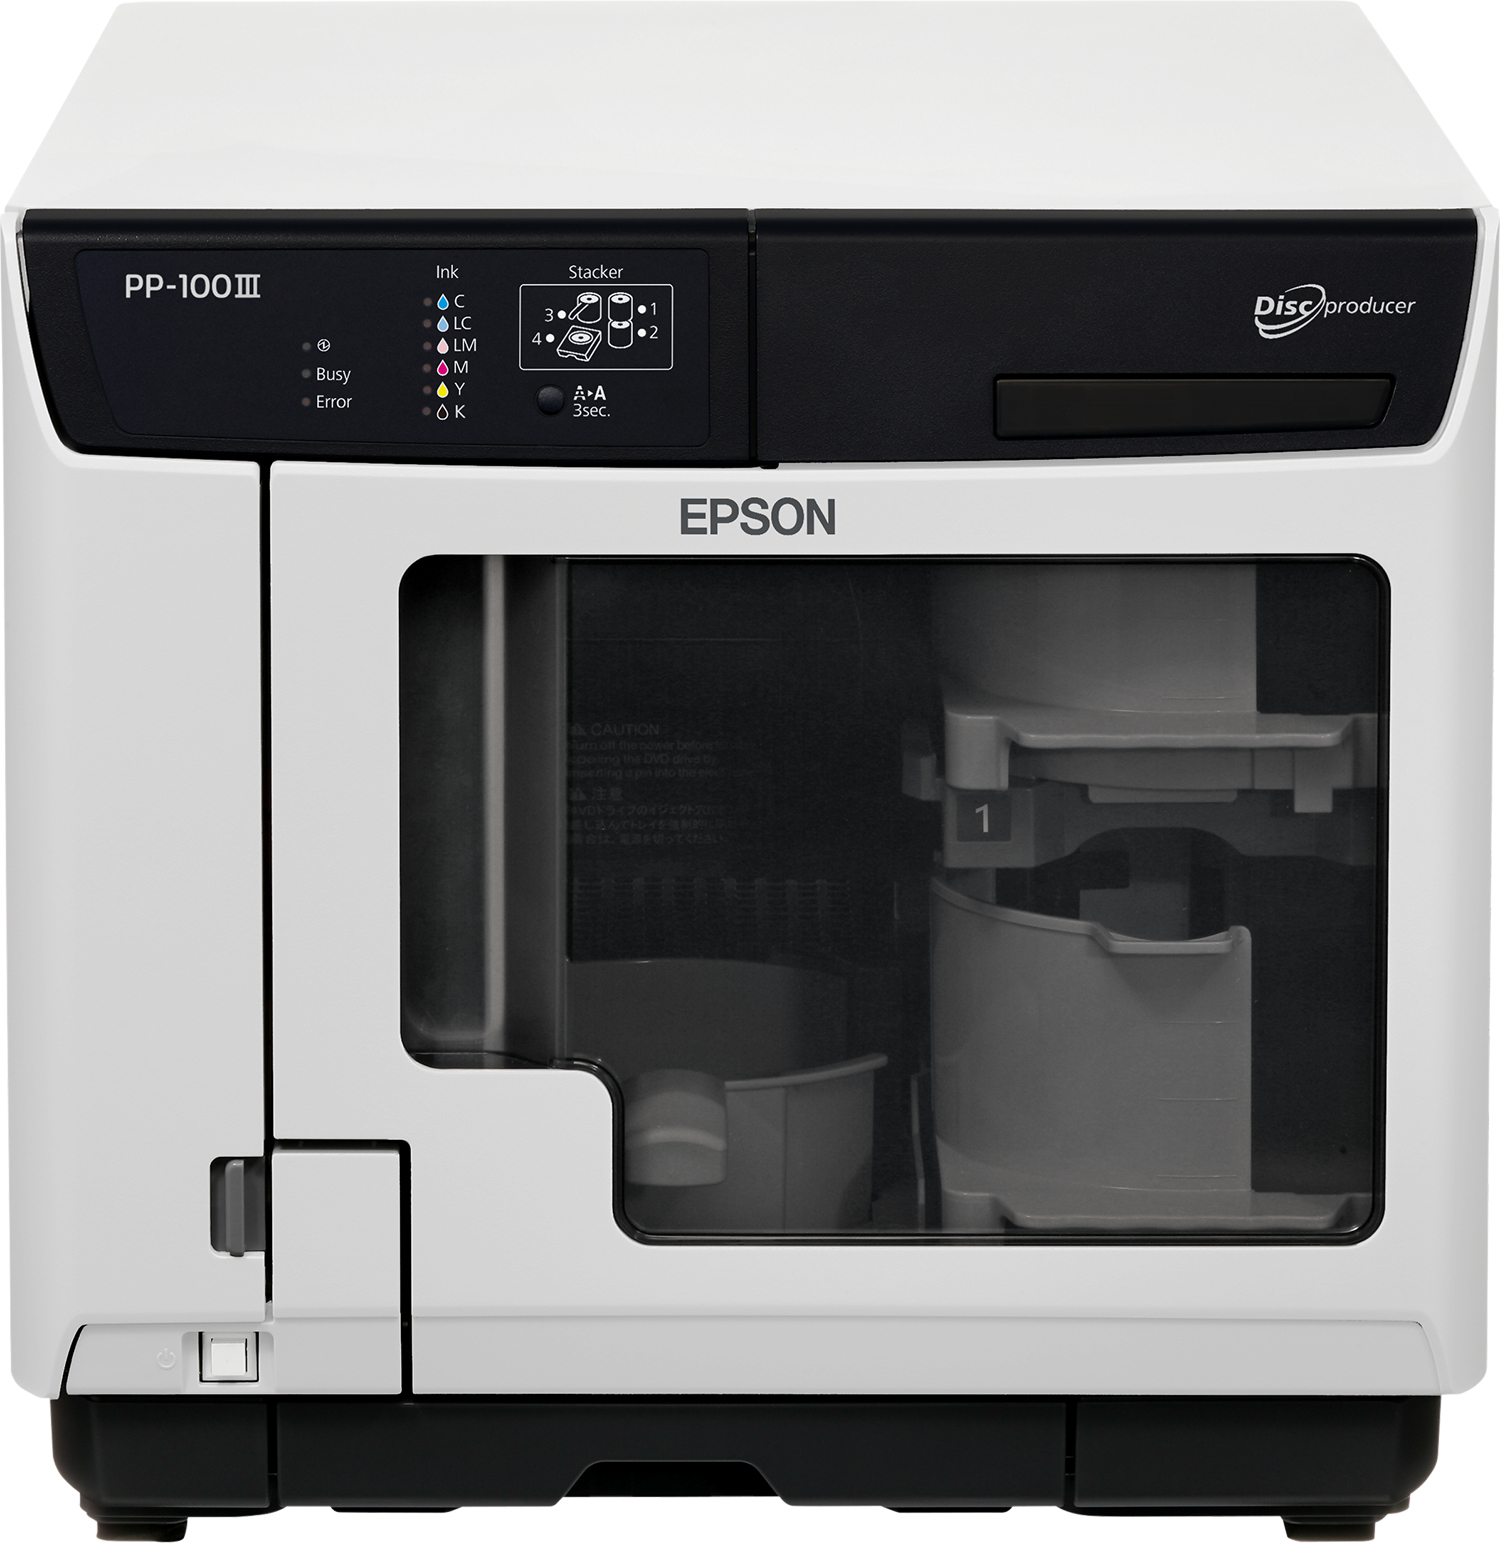 Image of Epson Discproducer PP-100III